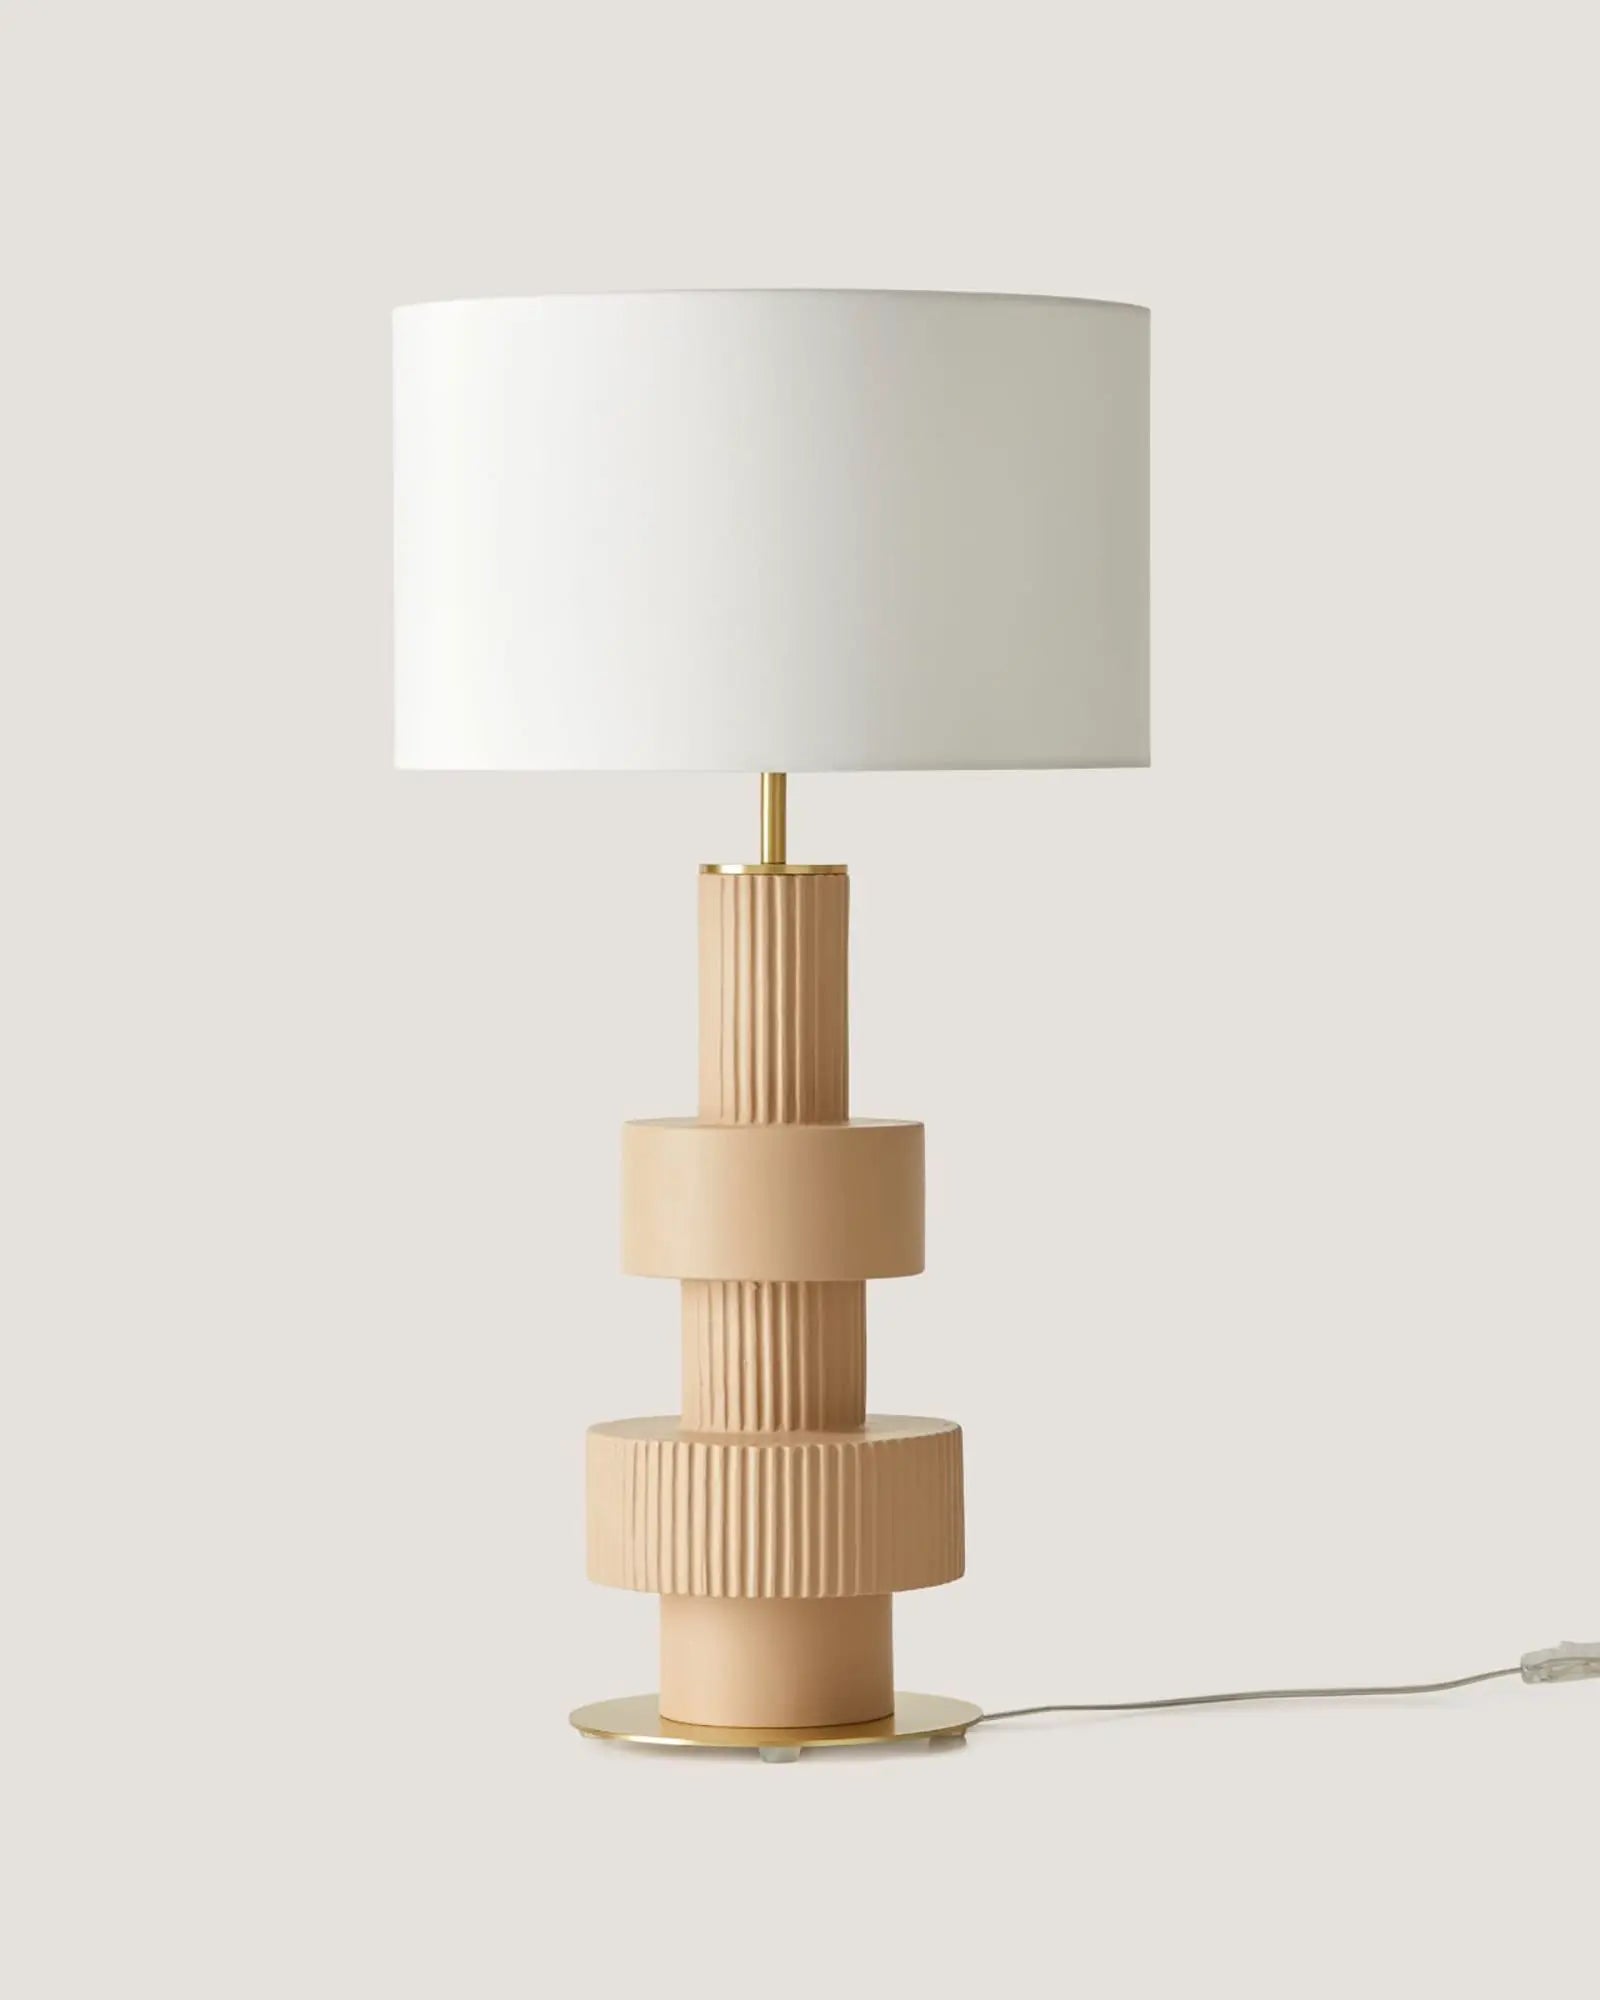 Babel ceramic contemporary table lamp with fabric shade